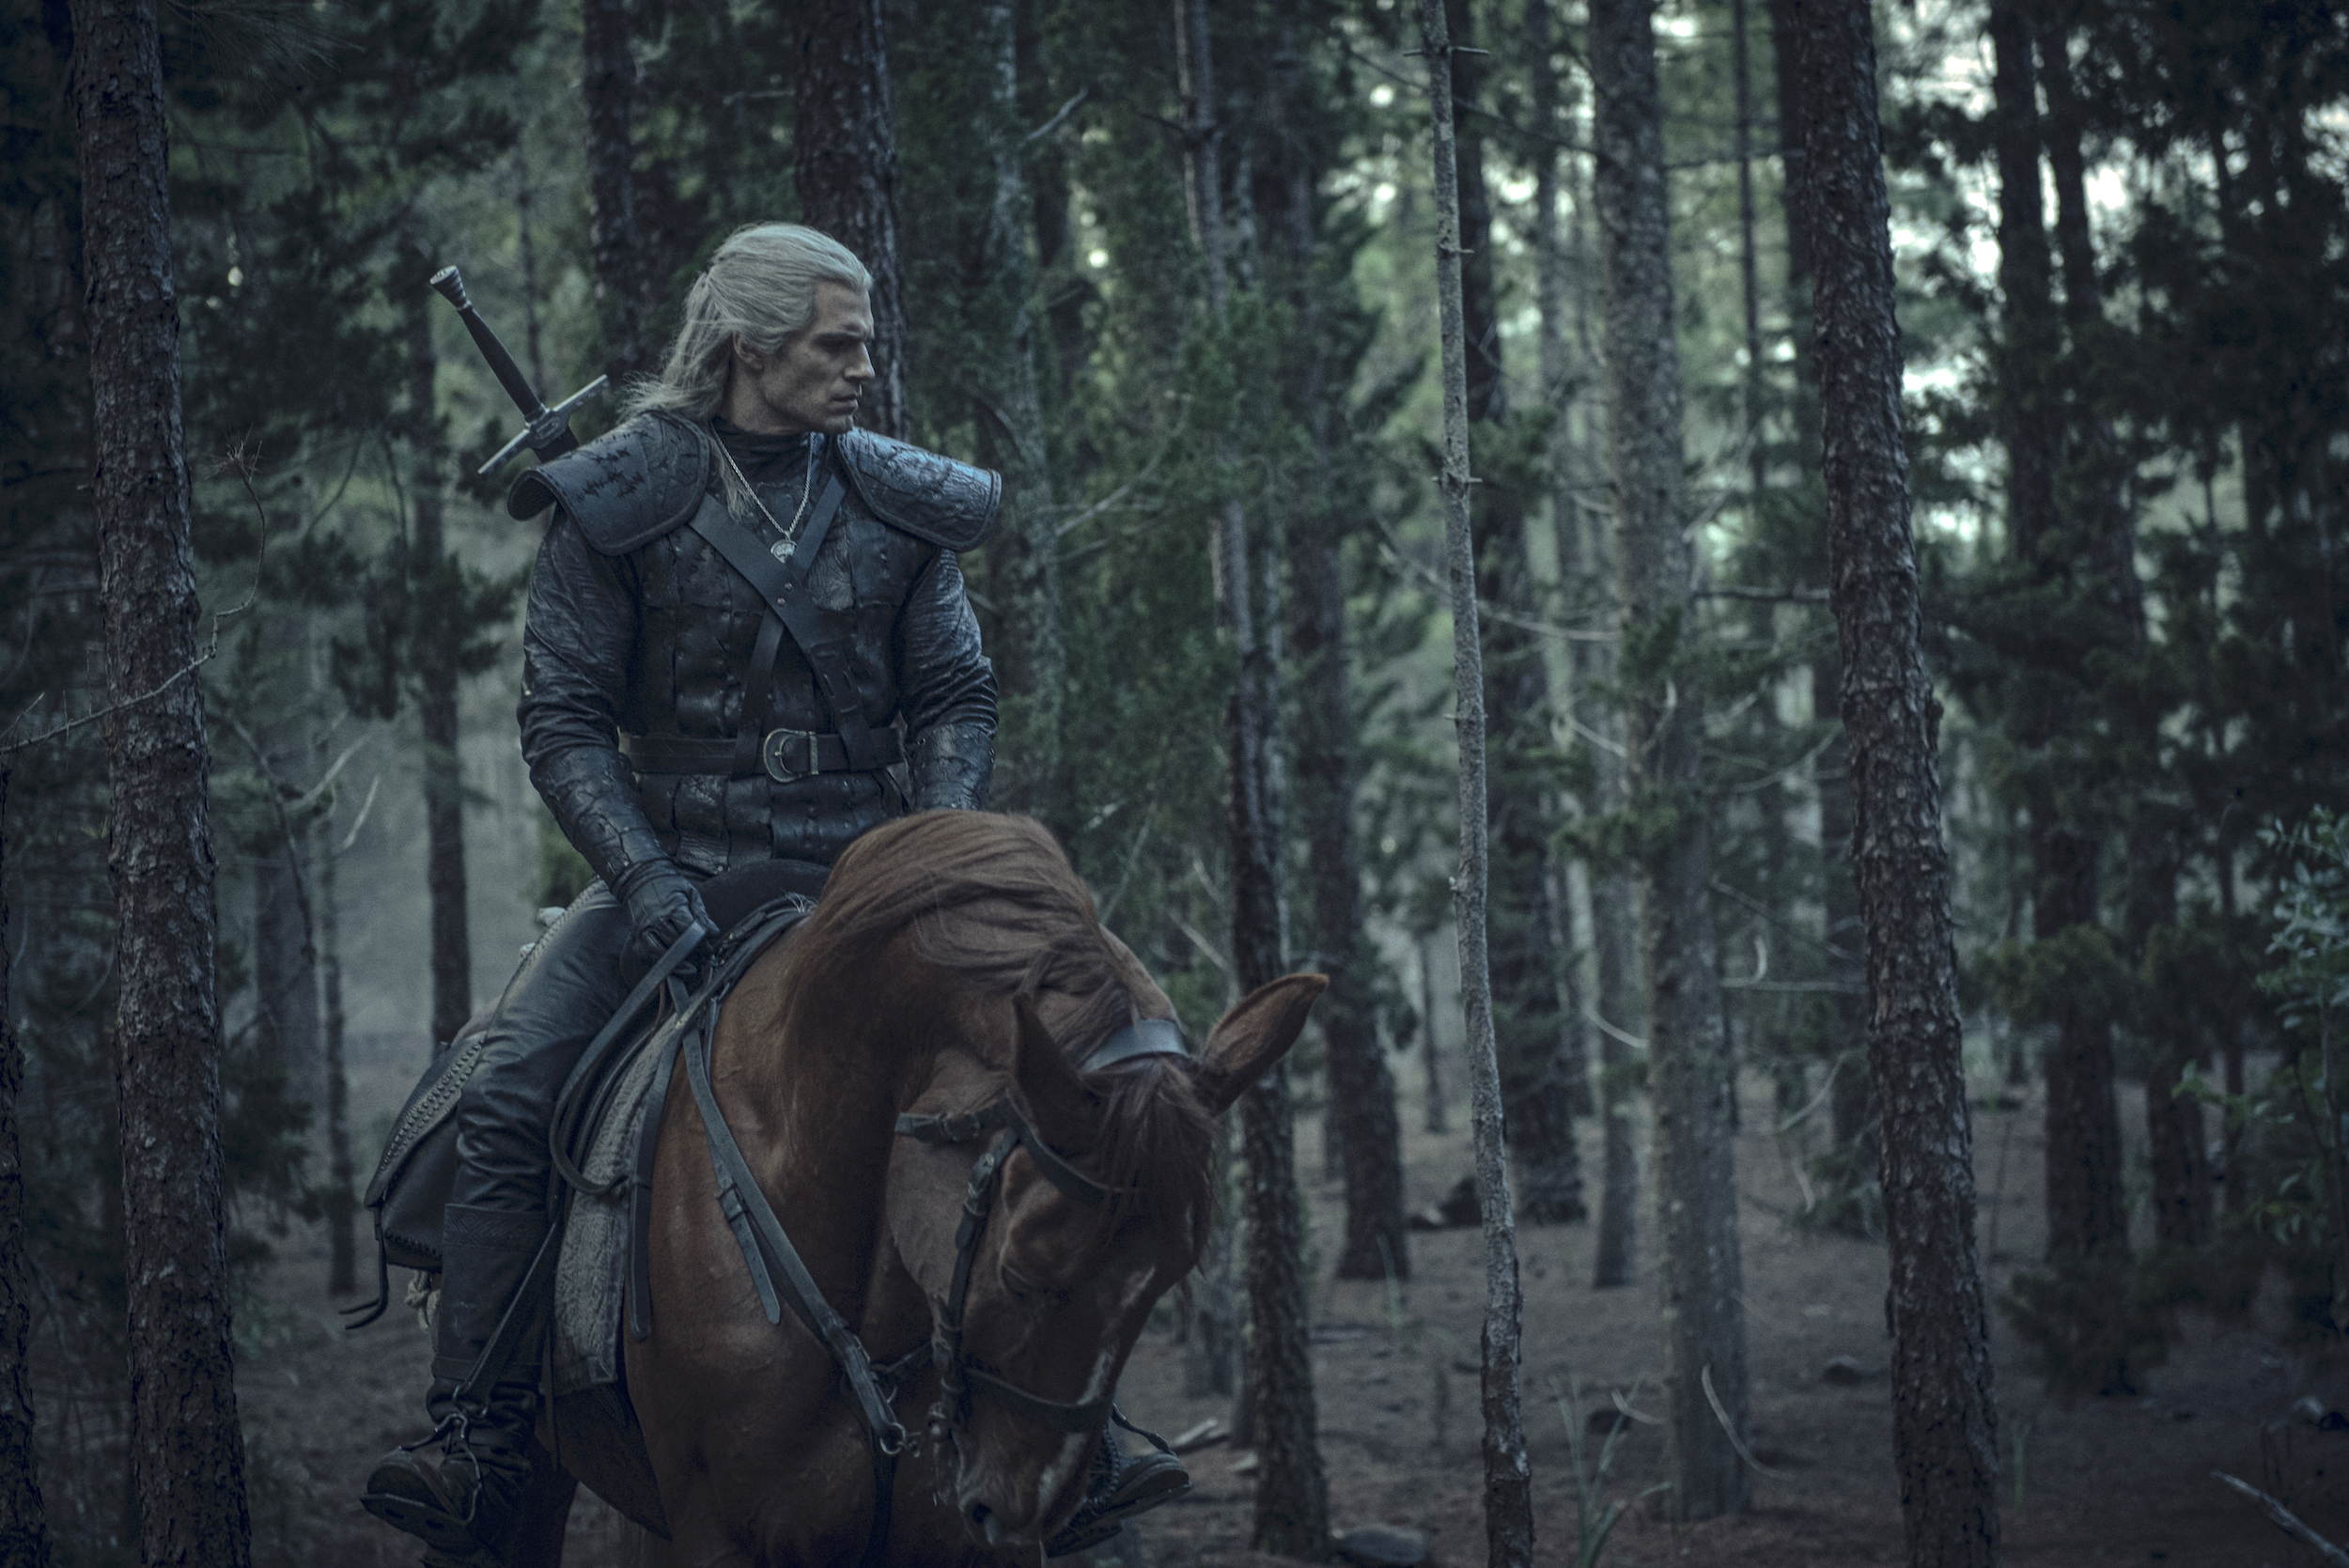 geralt rides roach the horse in the woods in the witcher on Netflix